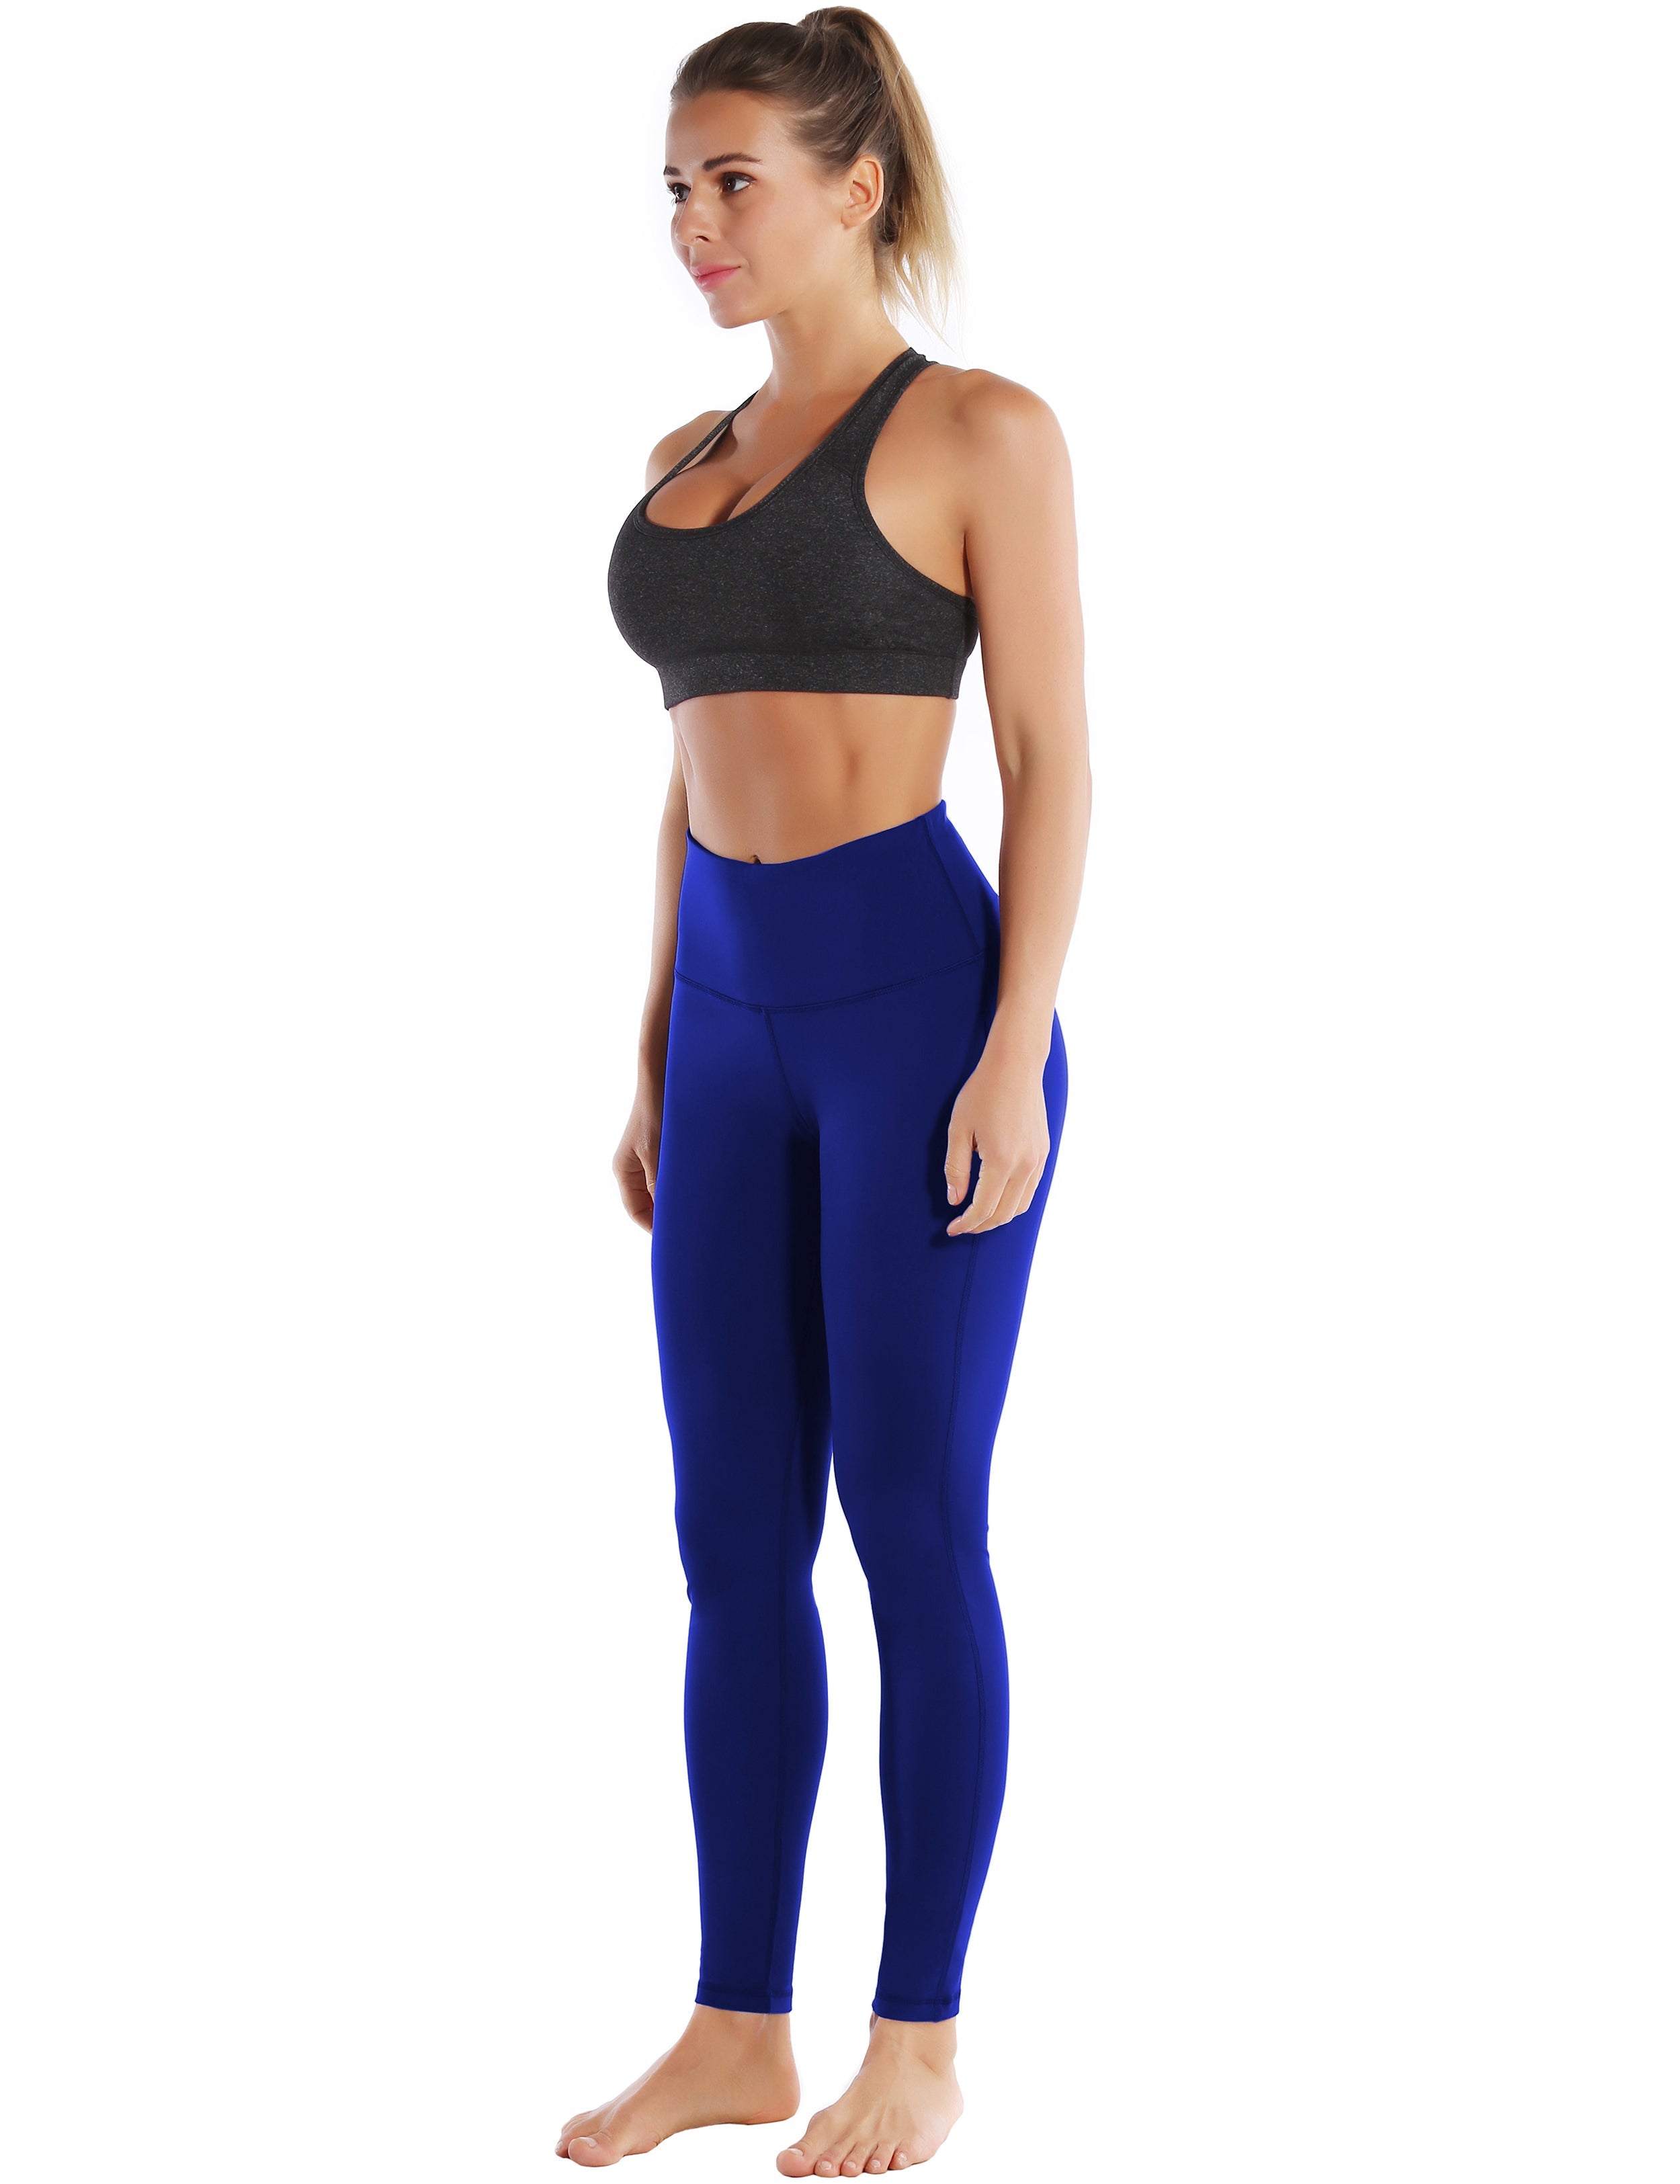 High Waist Side Line Golf Pants navy Side Line is Make Your Legs Look Longer and Thinner 75%Nylon/25%Spandex Fabric doesn't attract lint easily 4-way stretch No see-through Moisture-wicking Tummy control Inner pocket Two lengths